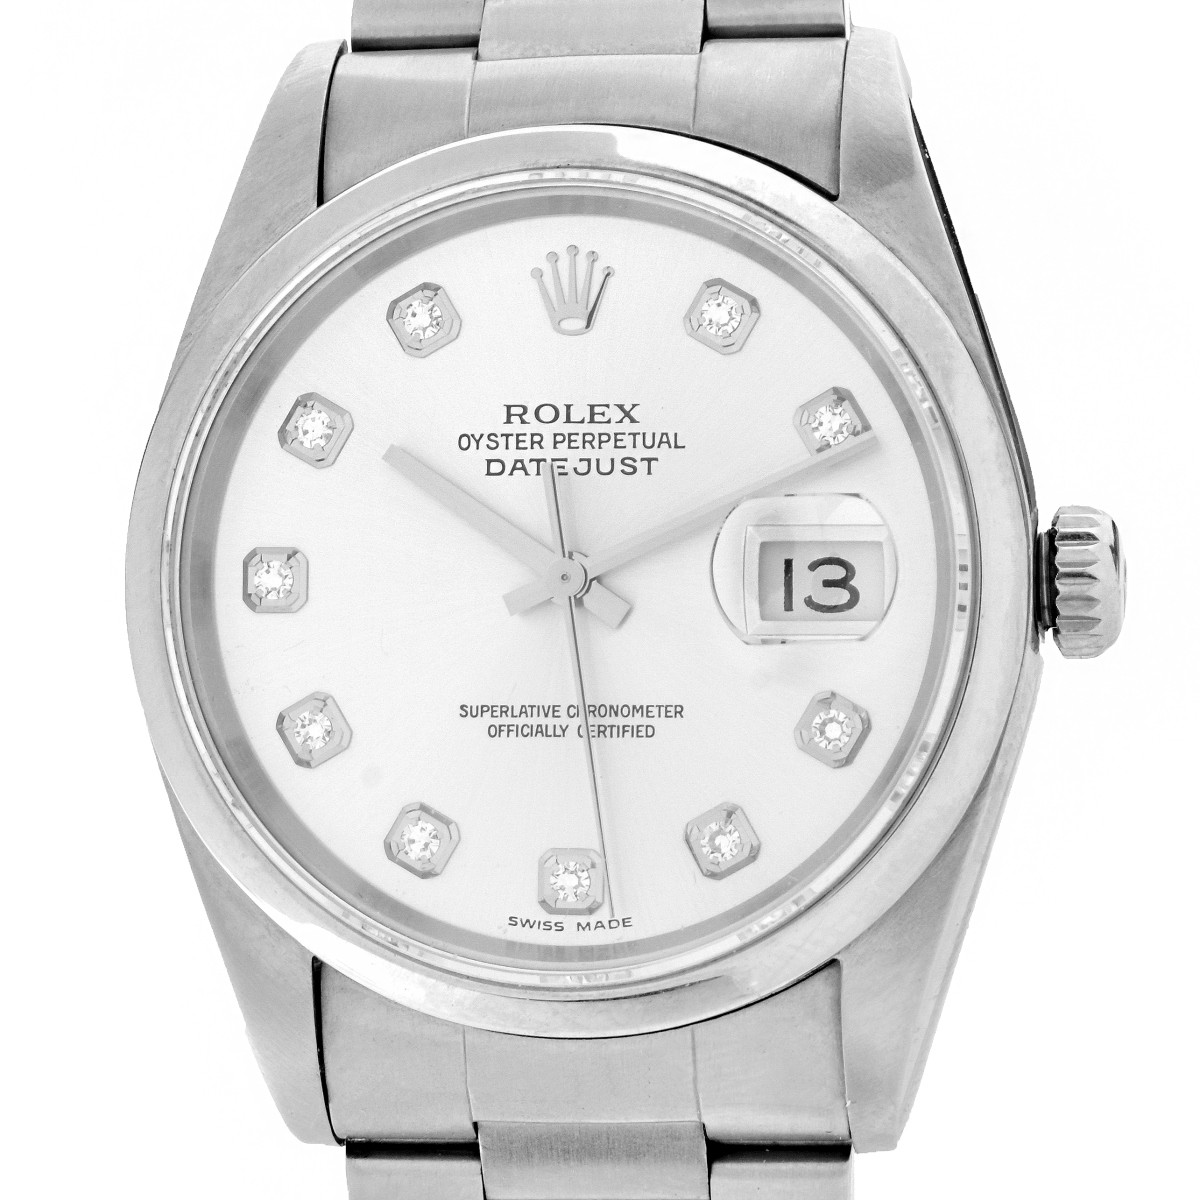 Rolex Oyster Perpetual Datejust Ref. 16200